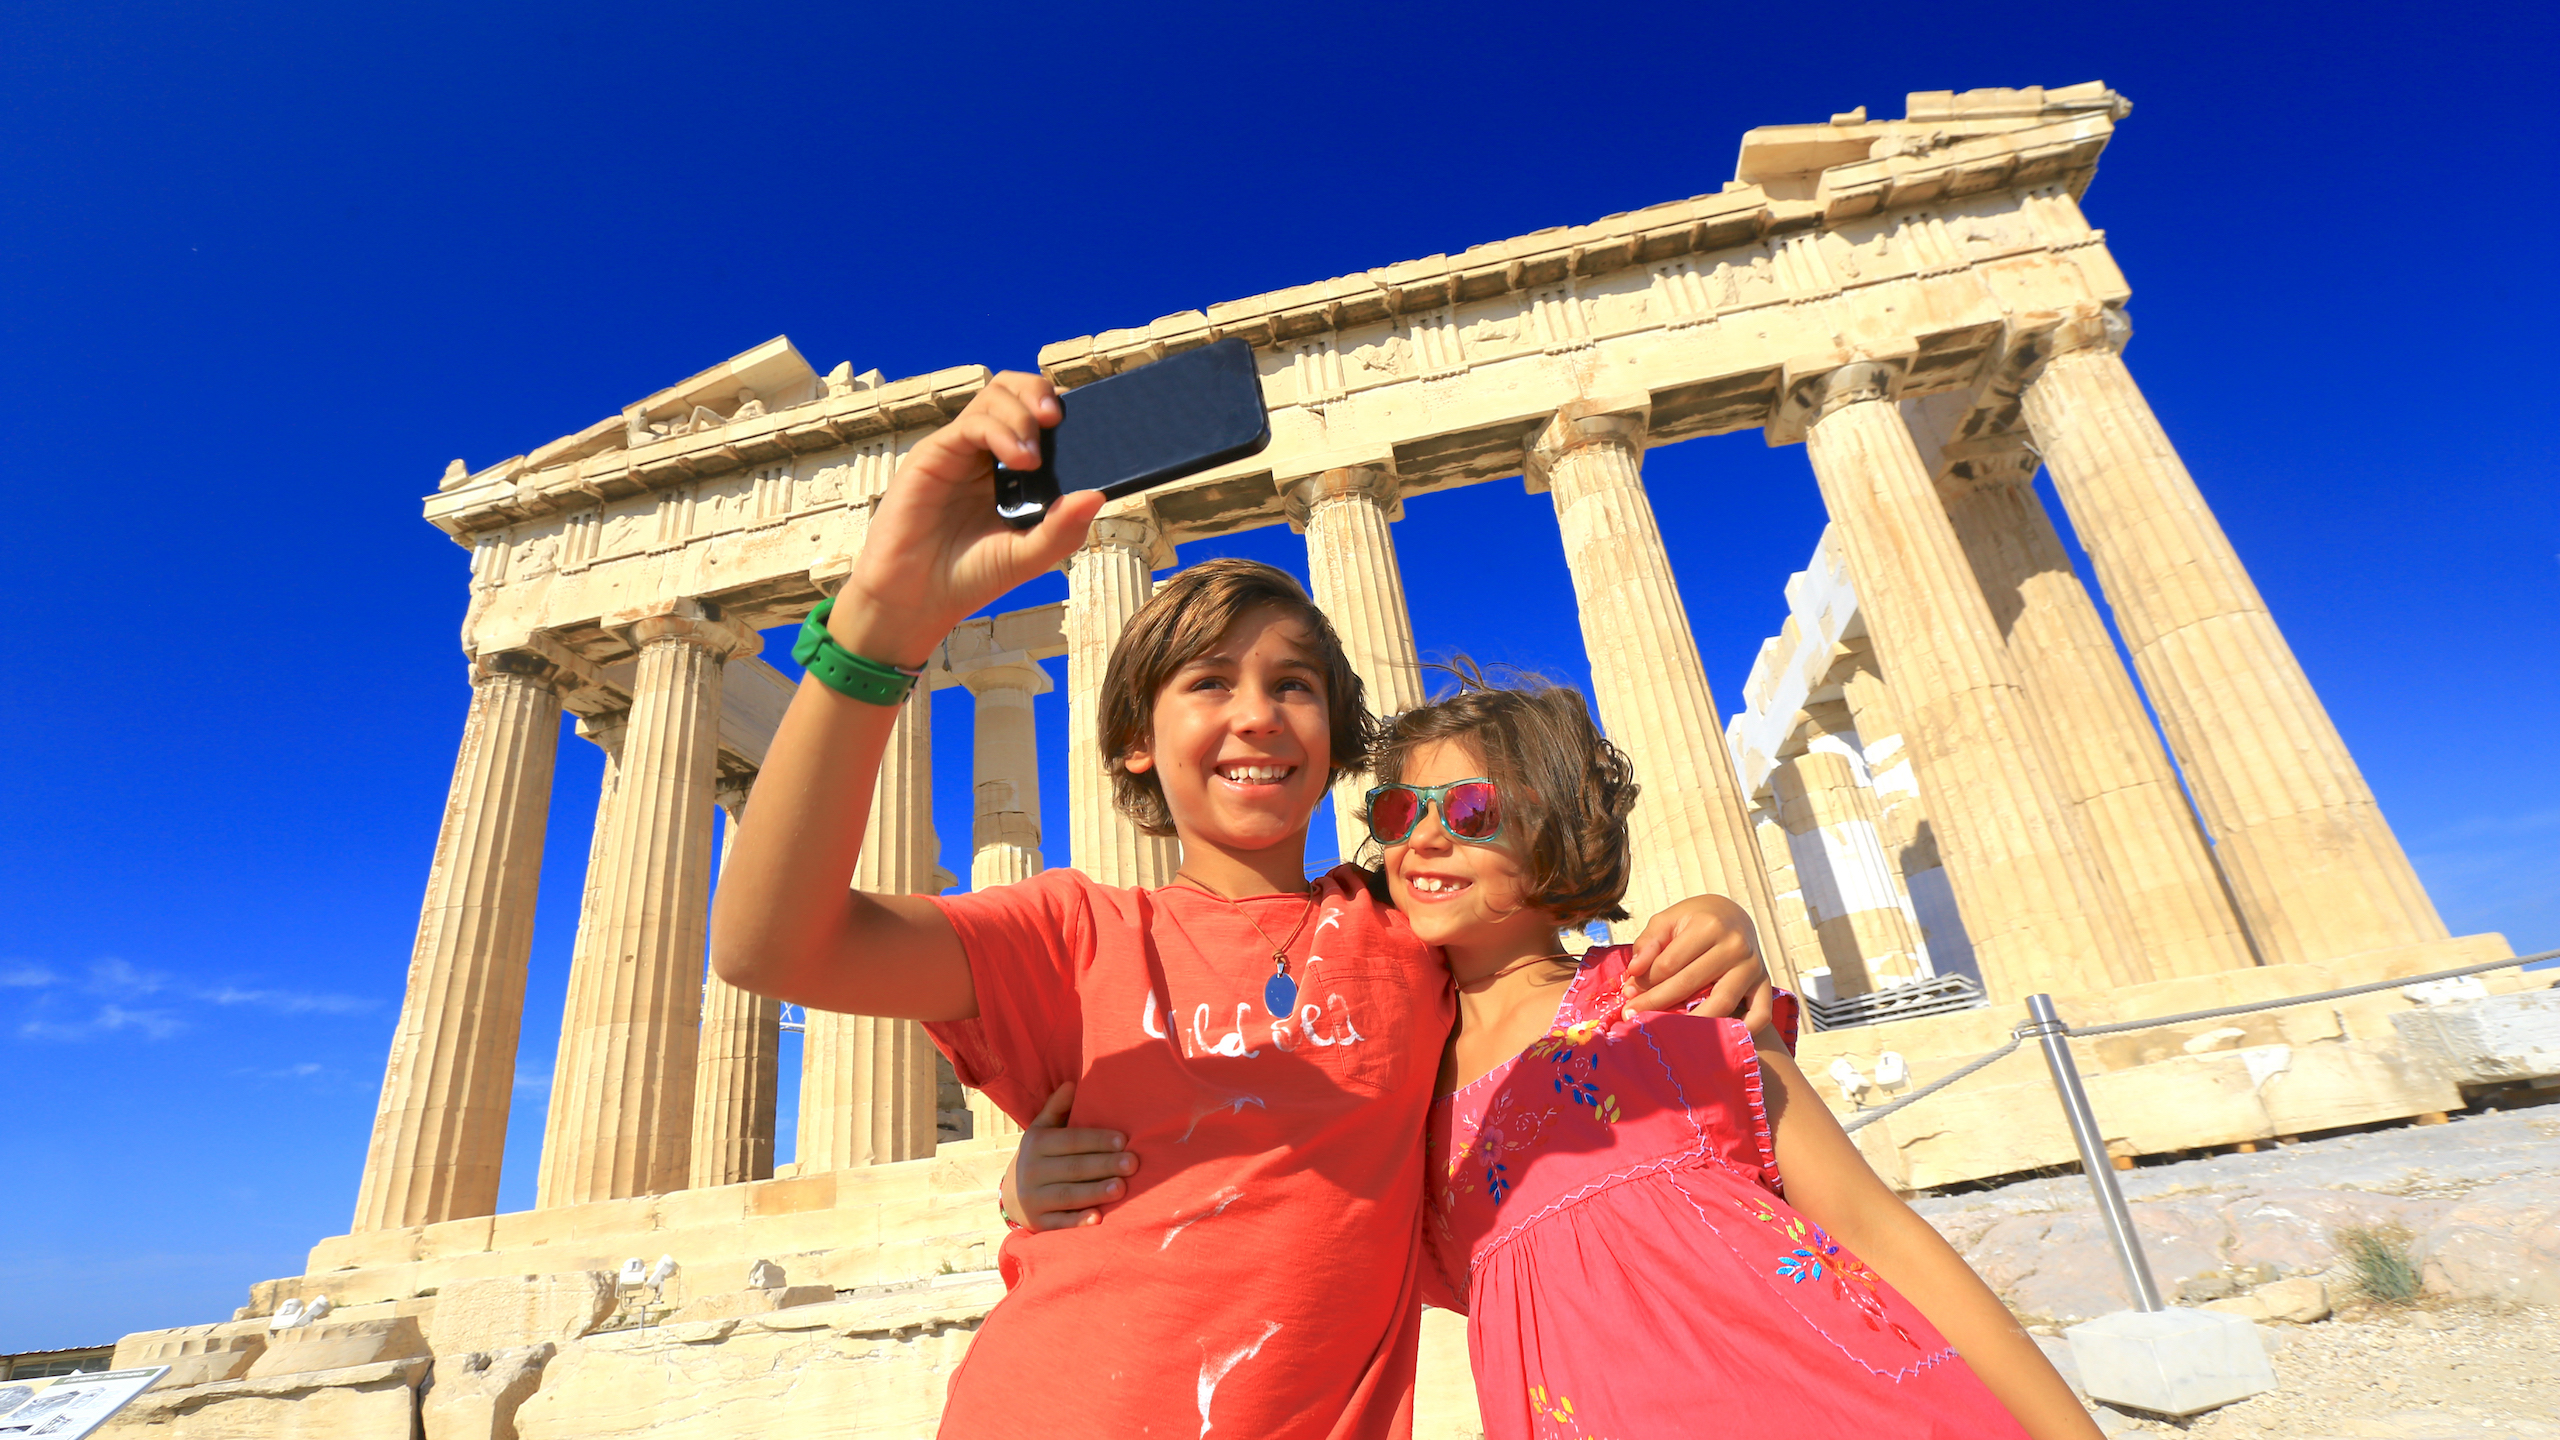 Kids taking selfie in front of Parthenon